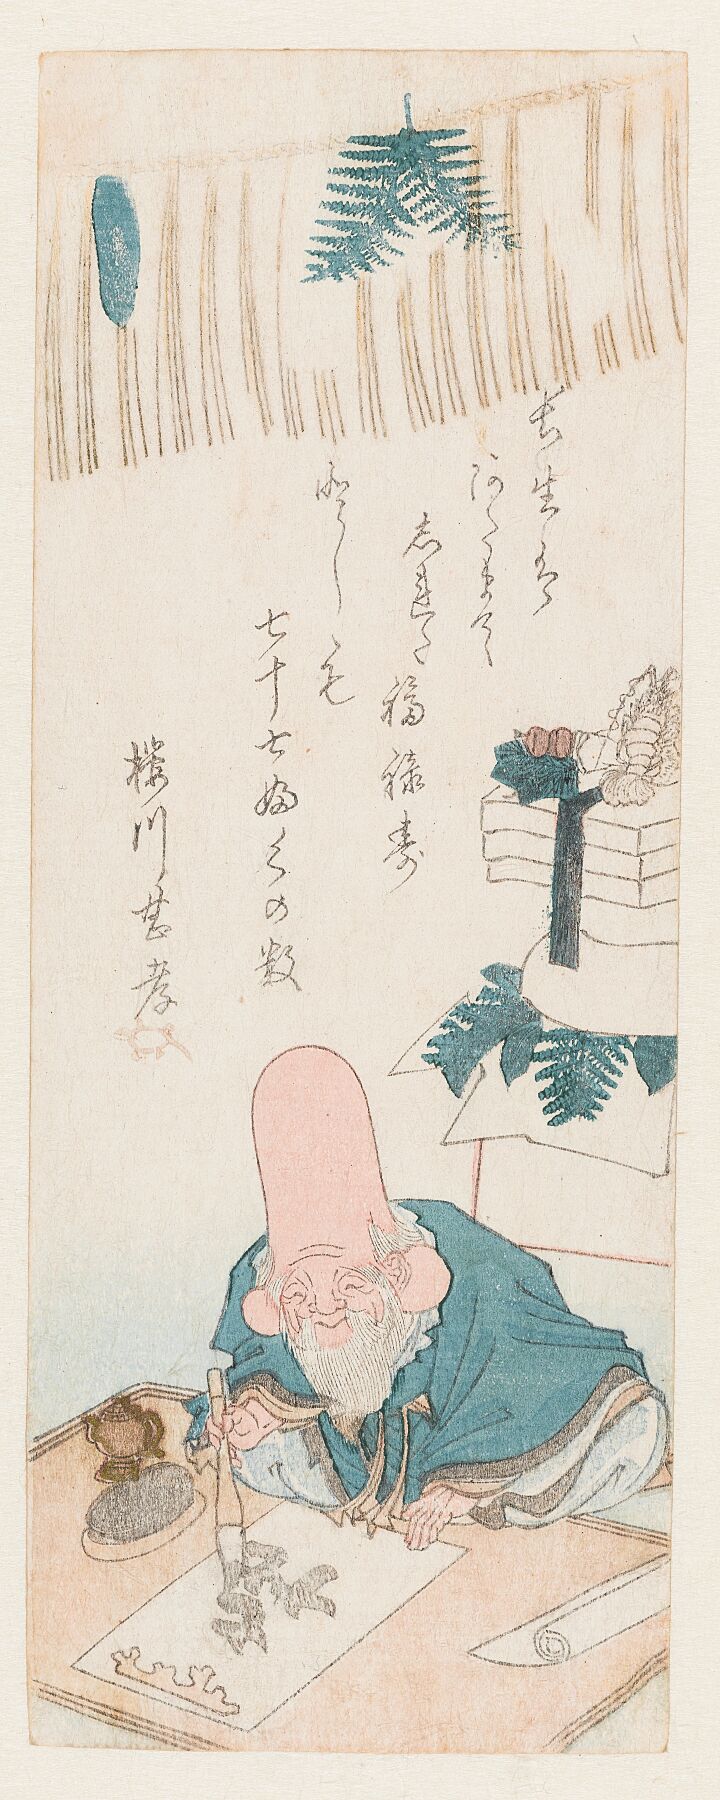 The God of Long-Life Writing, anonymous, c. 1837